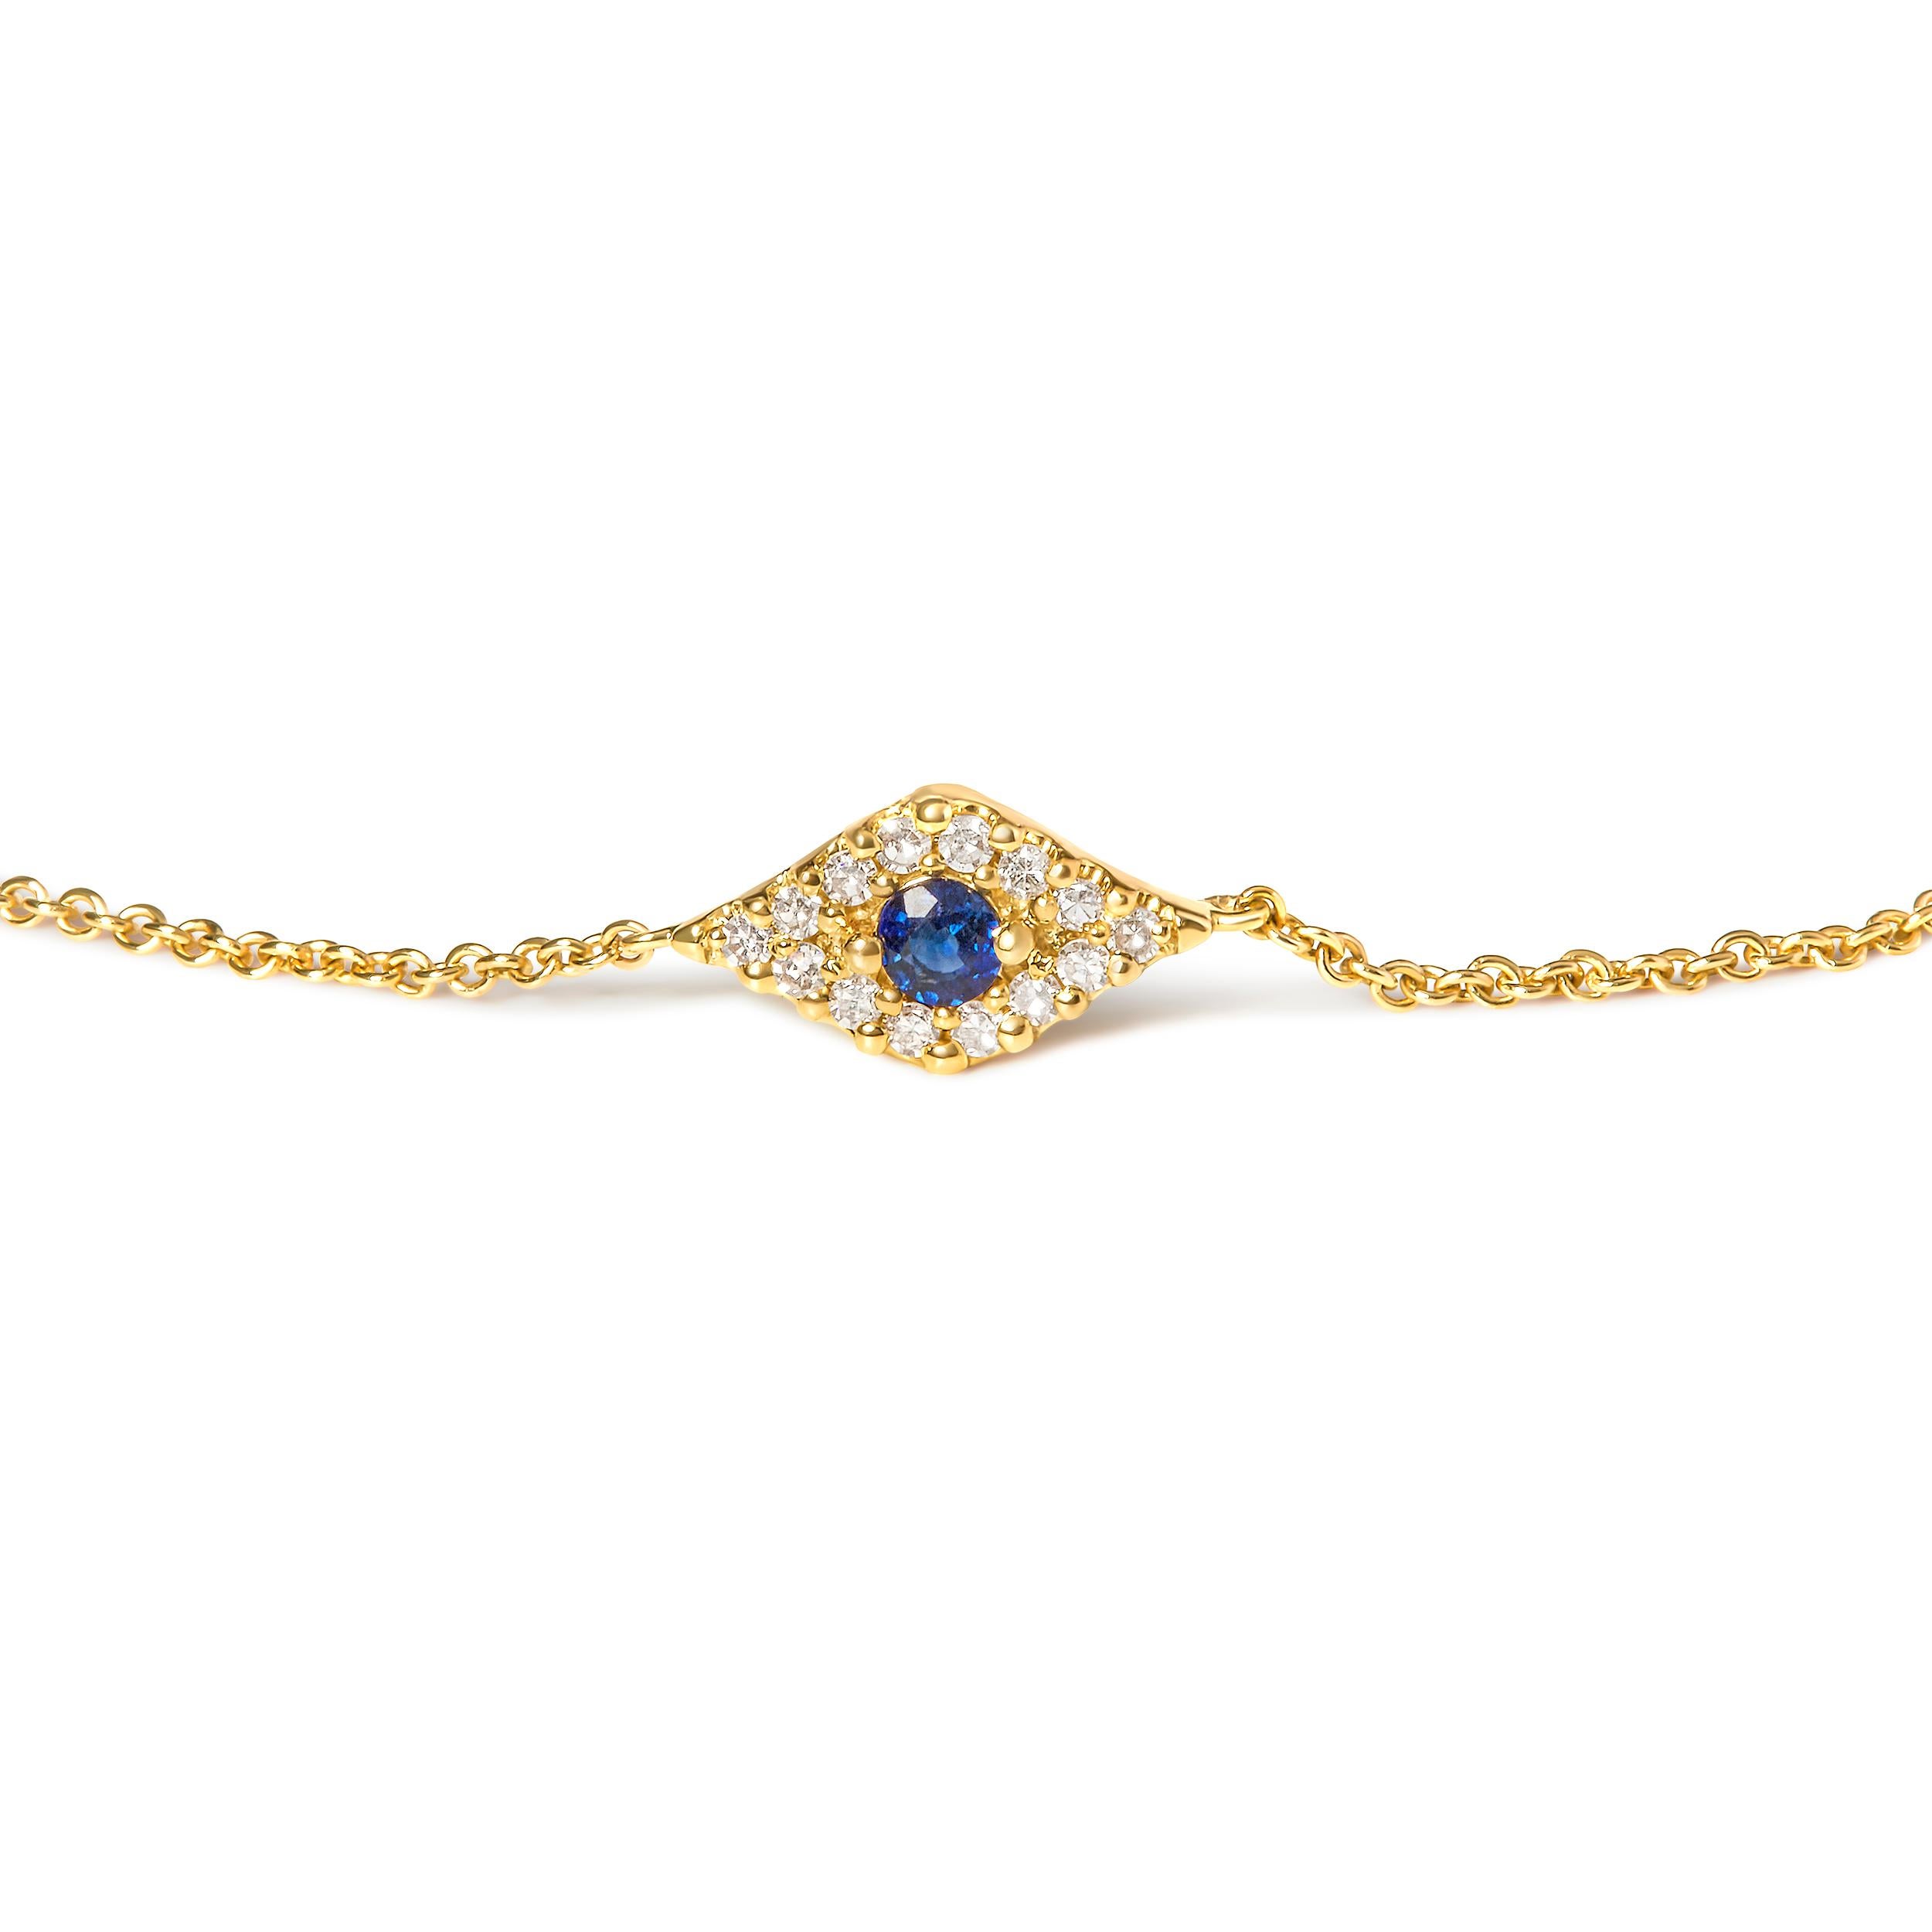 Introducing a captivating masterpiece that will mesmerize onlookers and add a touch of enchantment to your ensemble. Crafted with exquisite artistry, this 10K Yellow Gold Blue Sapphire and Diamond Accent Evil Eye Station Link Bracelet is a true